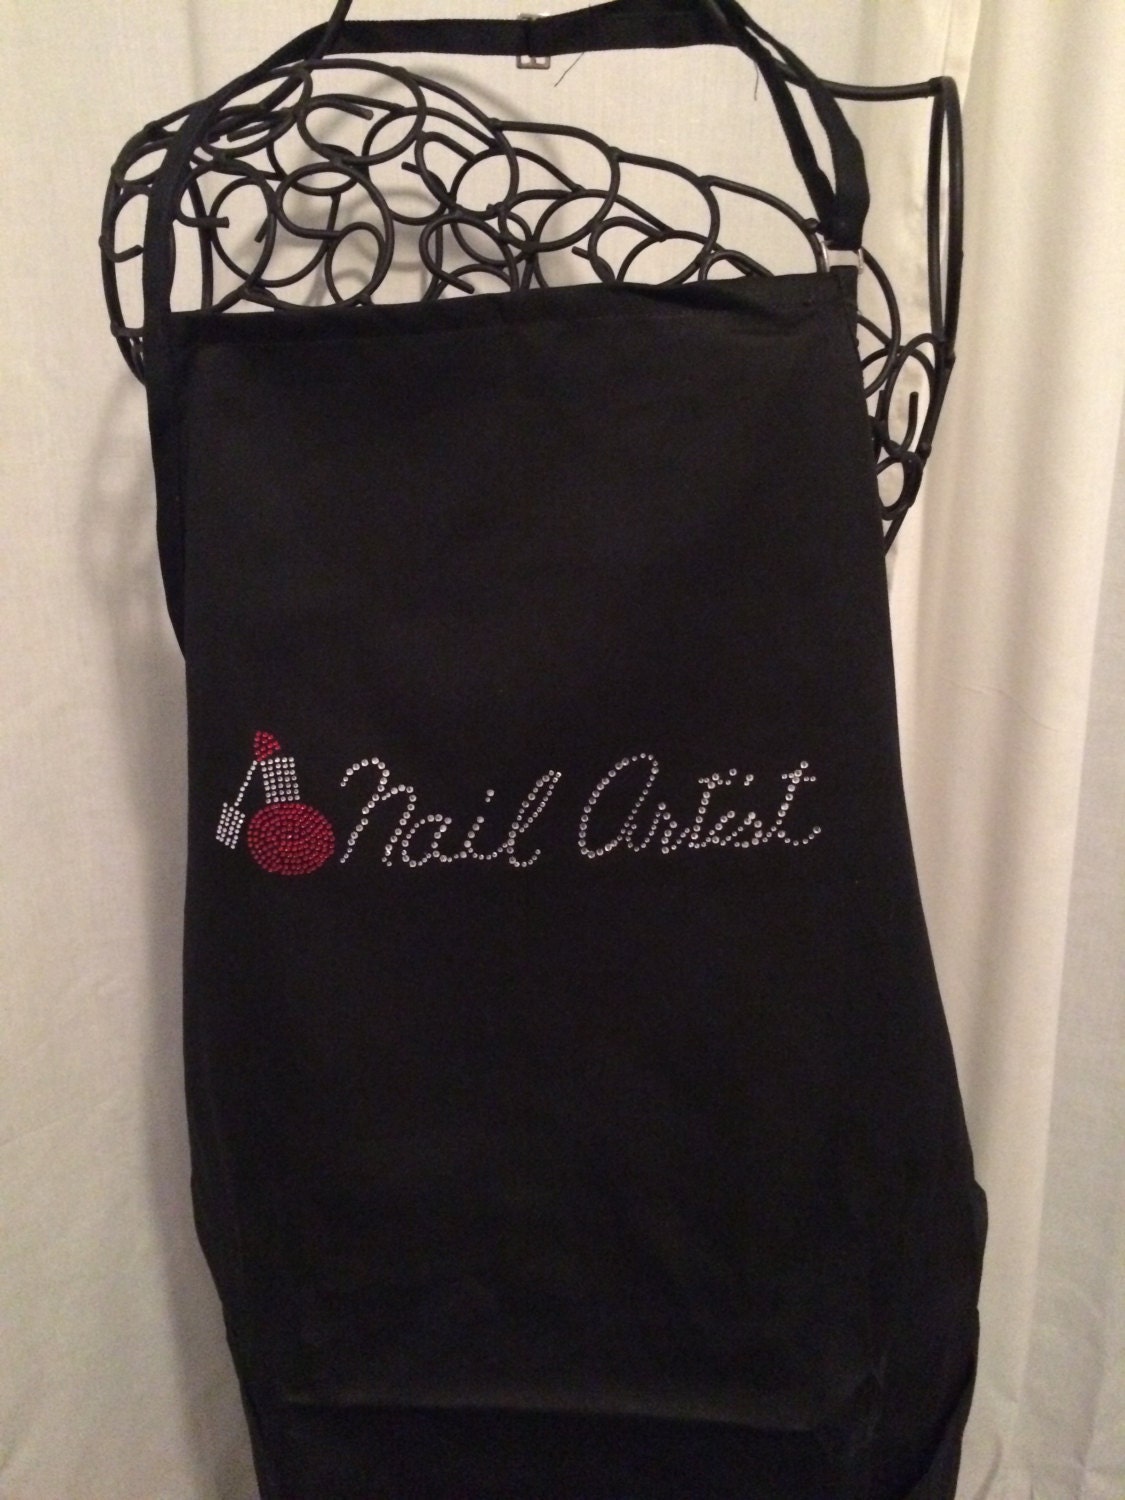 Professional Nail Artist Apron with Pouch Pockets